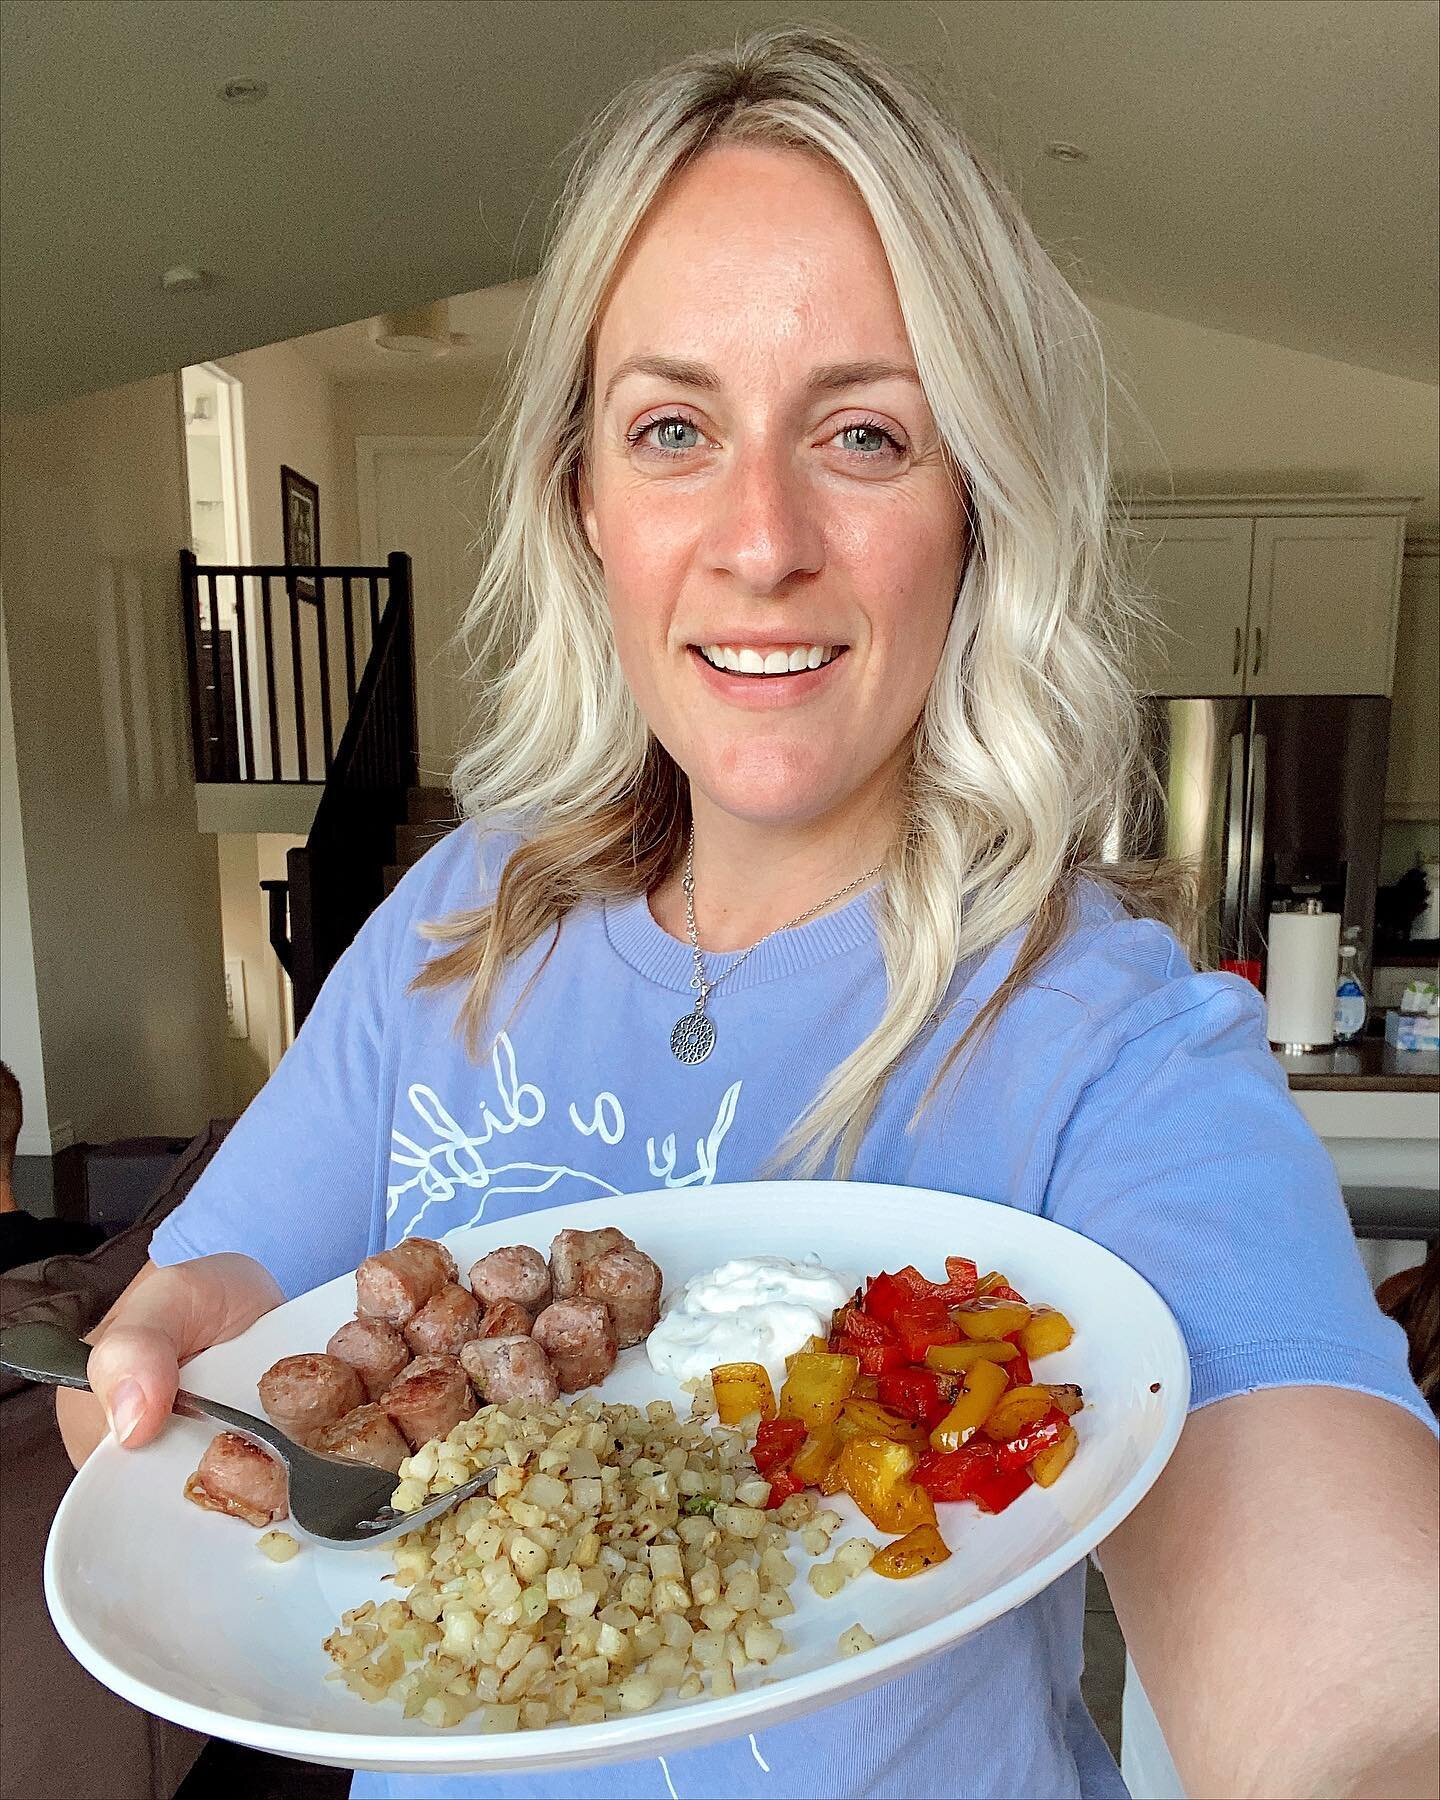 Simplicity wins🏆

I don&rsquo;t prioritize meal planning - and to be realistic, right now I don&rsquo;t want to.

With my new weekly cleaning schedule, along with morning and evening routines - my plate is full of other things that make my home feel